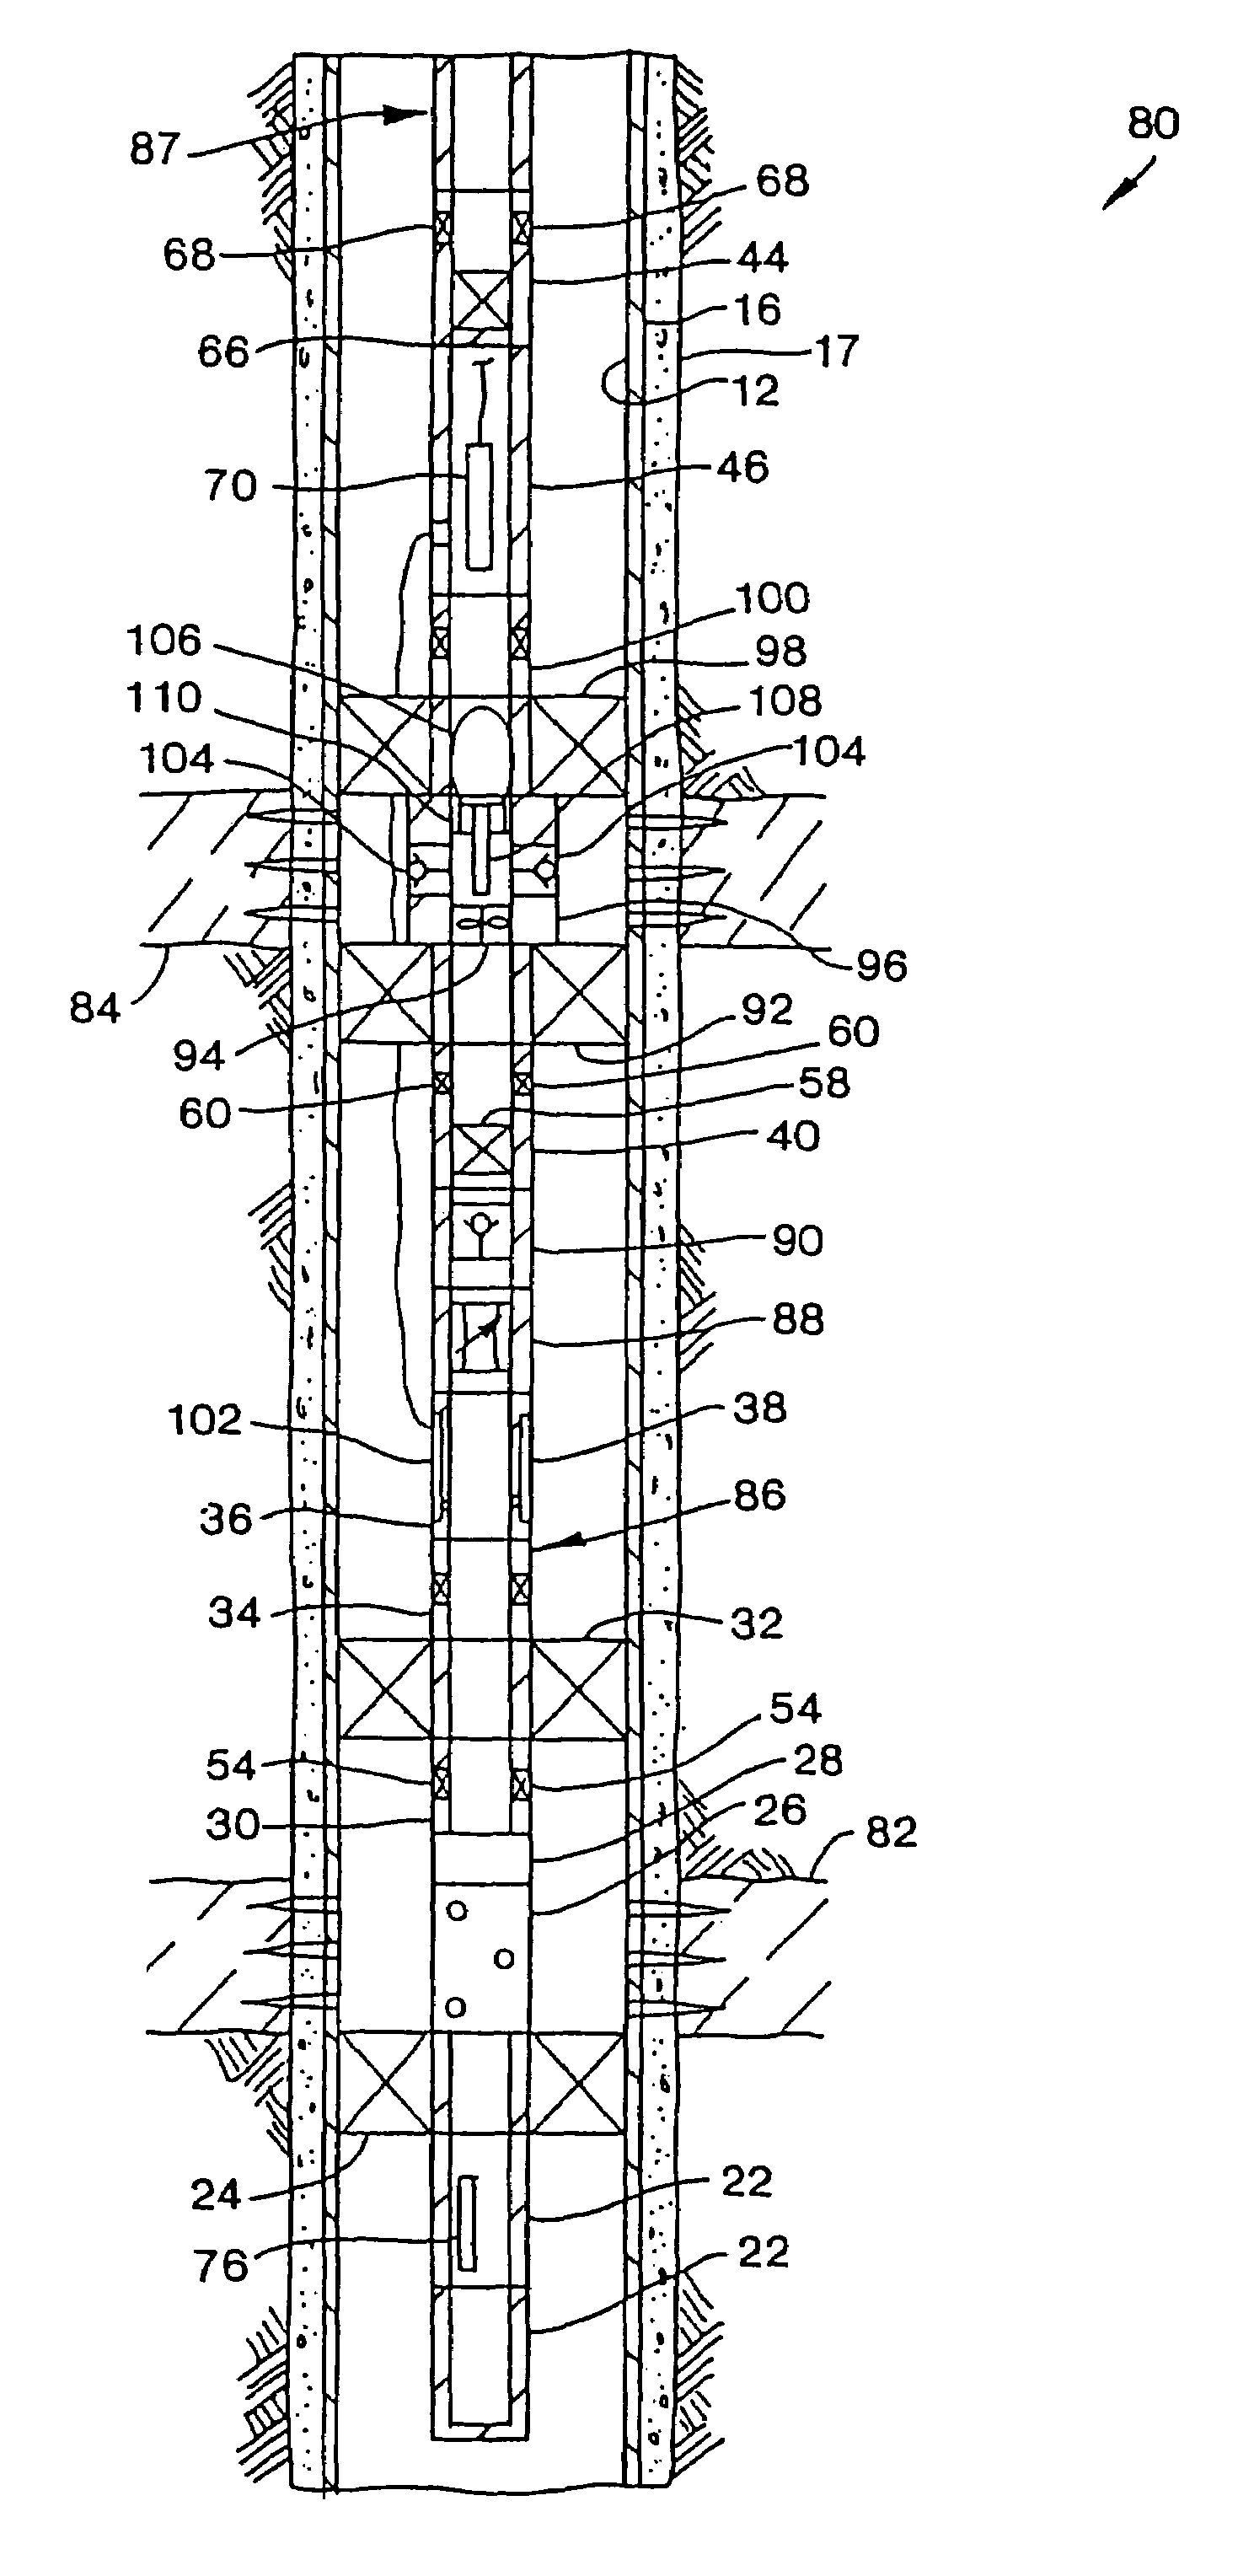 Methods of downhole testing subterranean formations and associated apparatus therefor